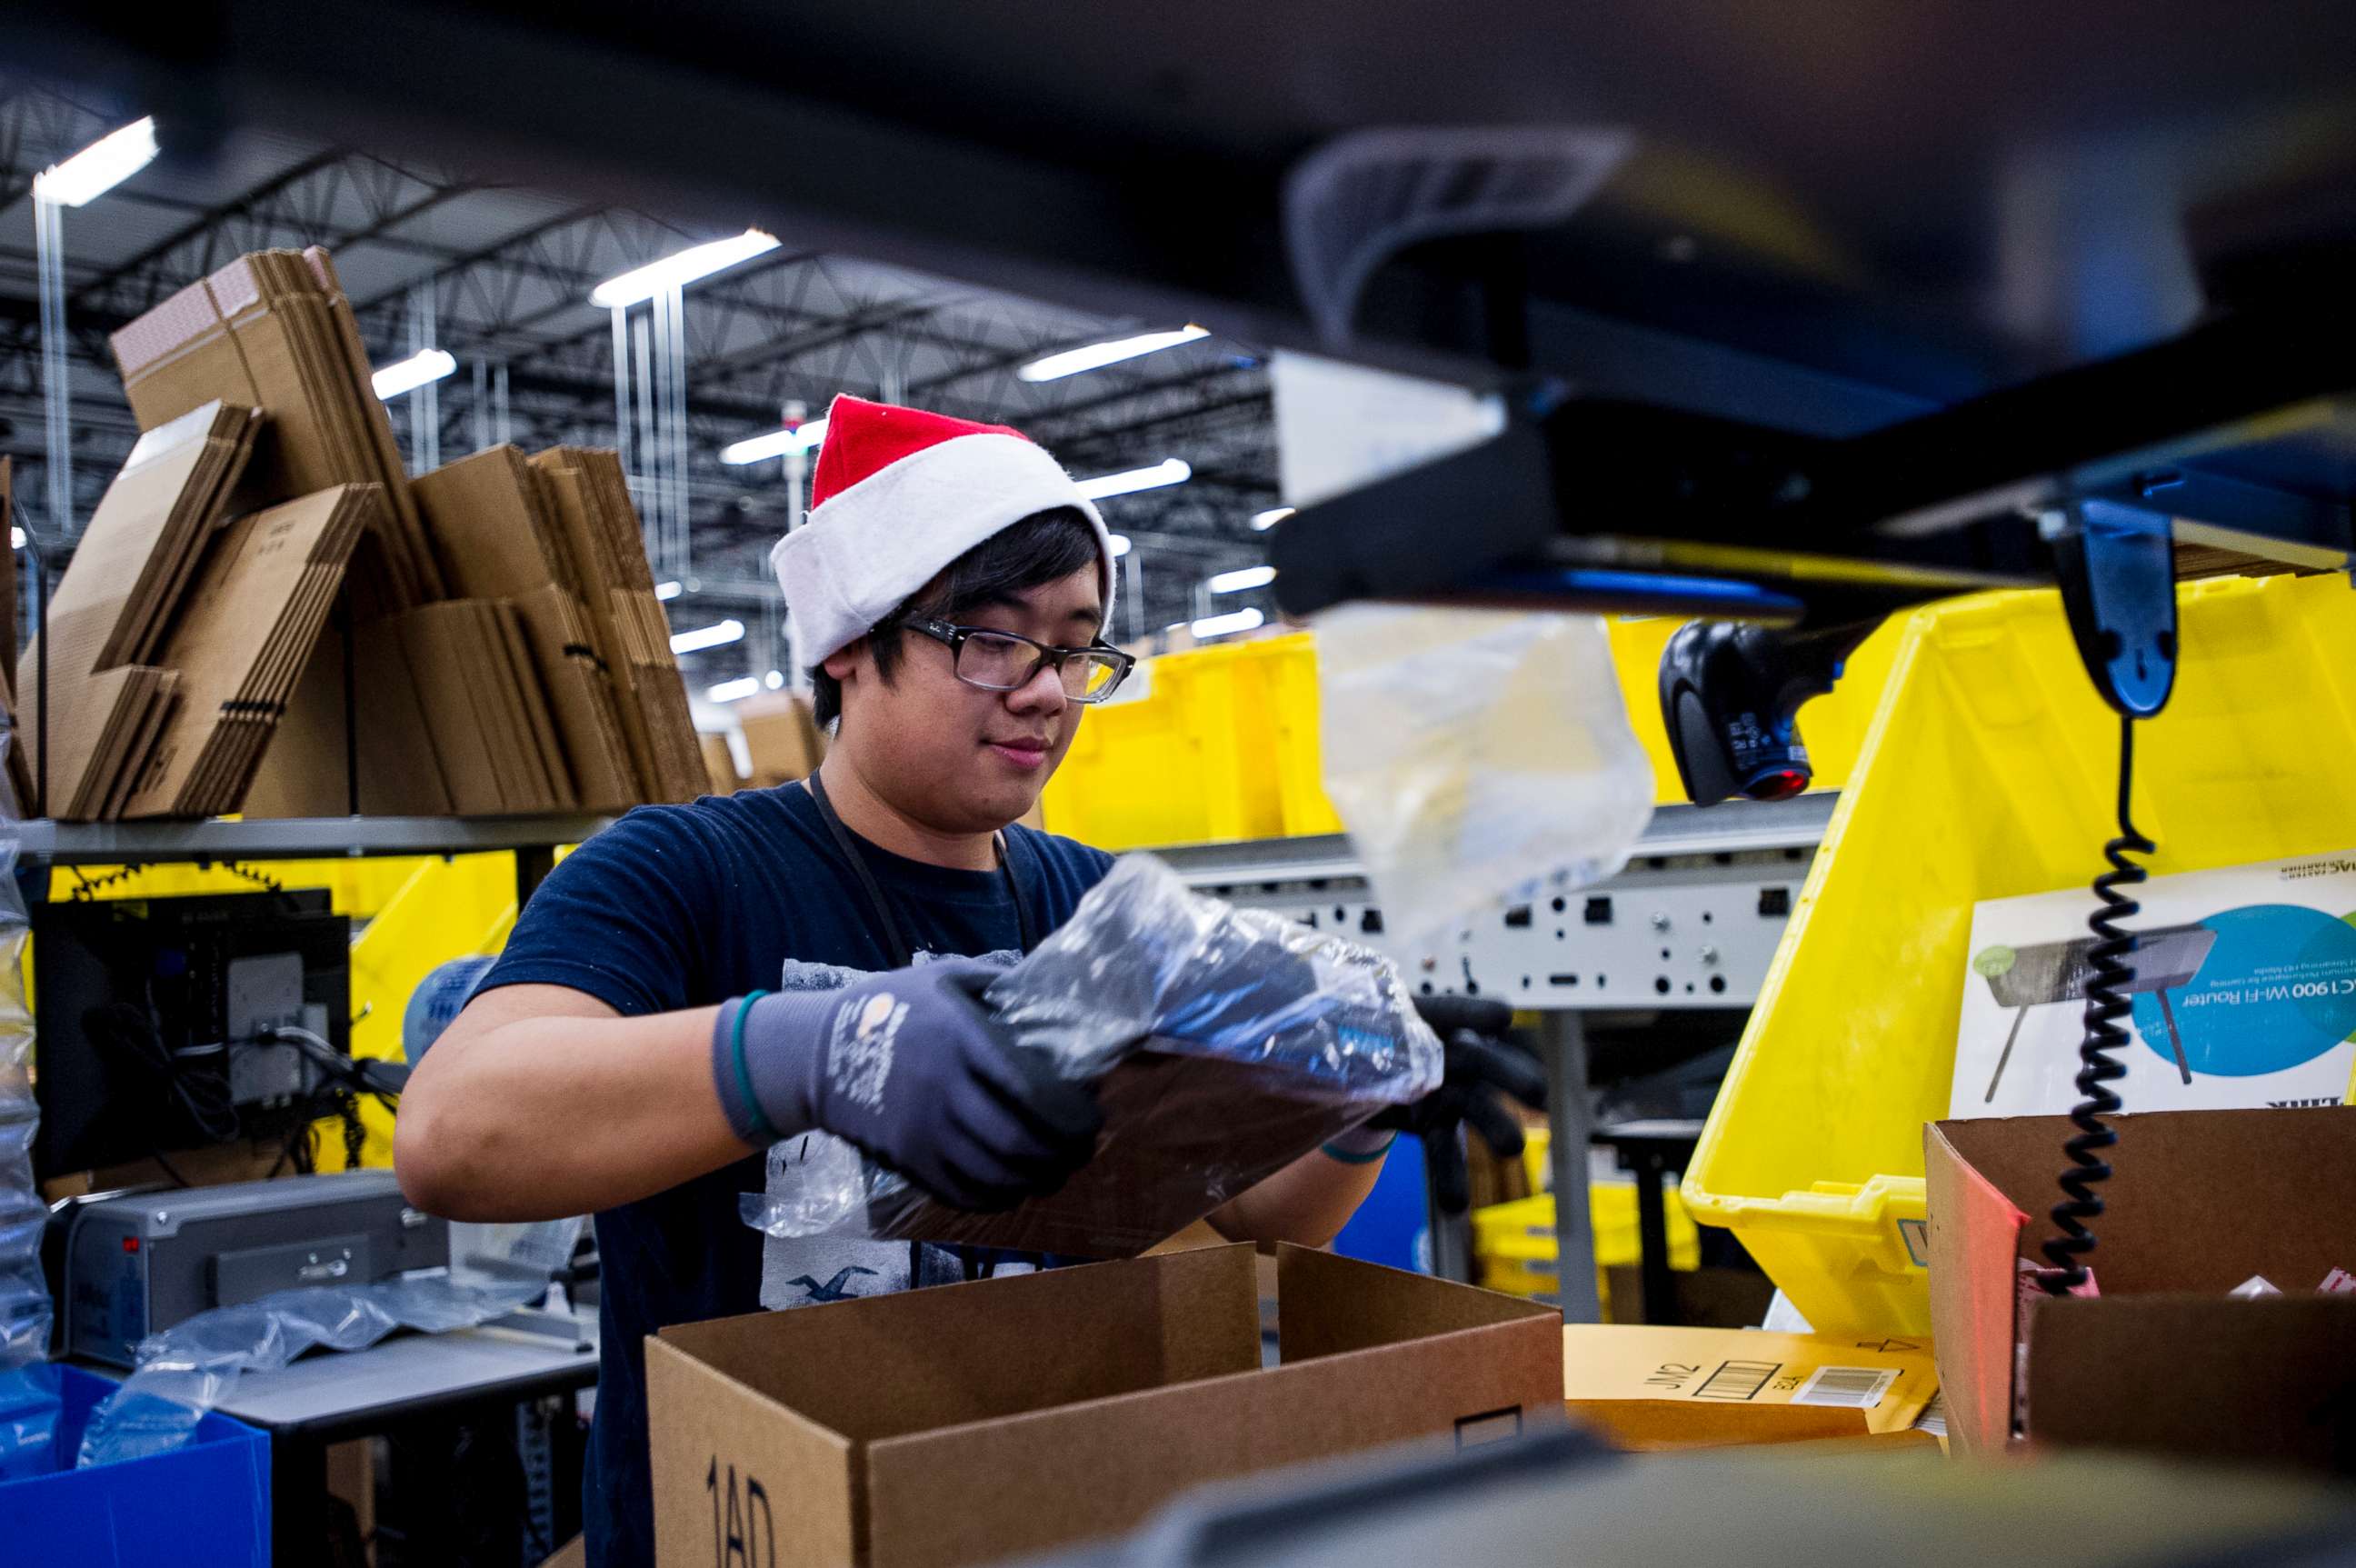 PHOTO: An Amazon.com Inc. employee loads merchandise into a box at the company's fulfillment center ahead of Cyber Monday in Tracy, Calif., Nov. 30, 2014.